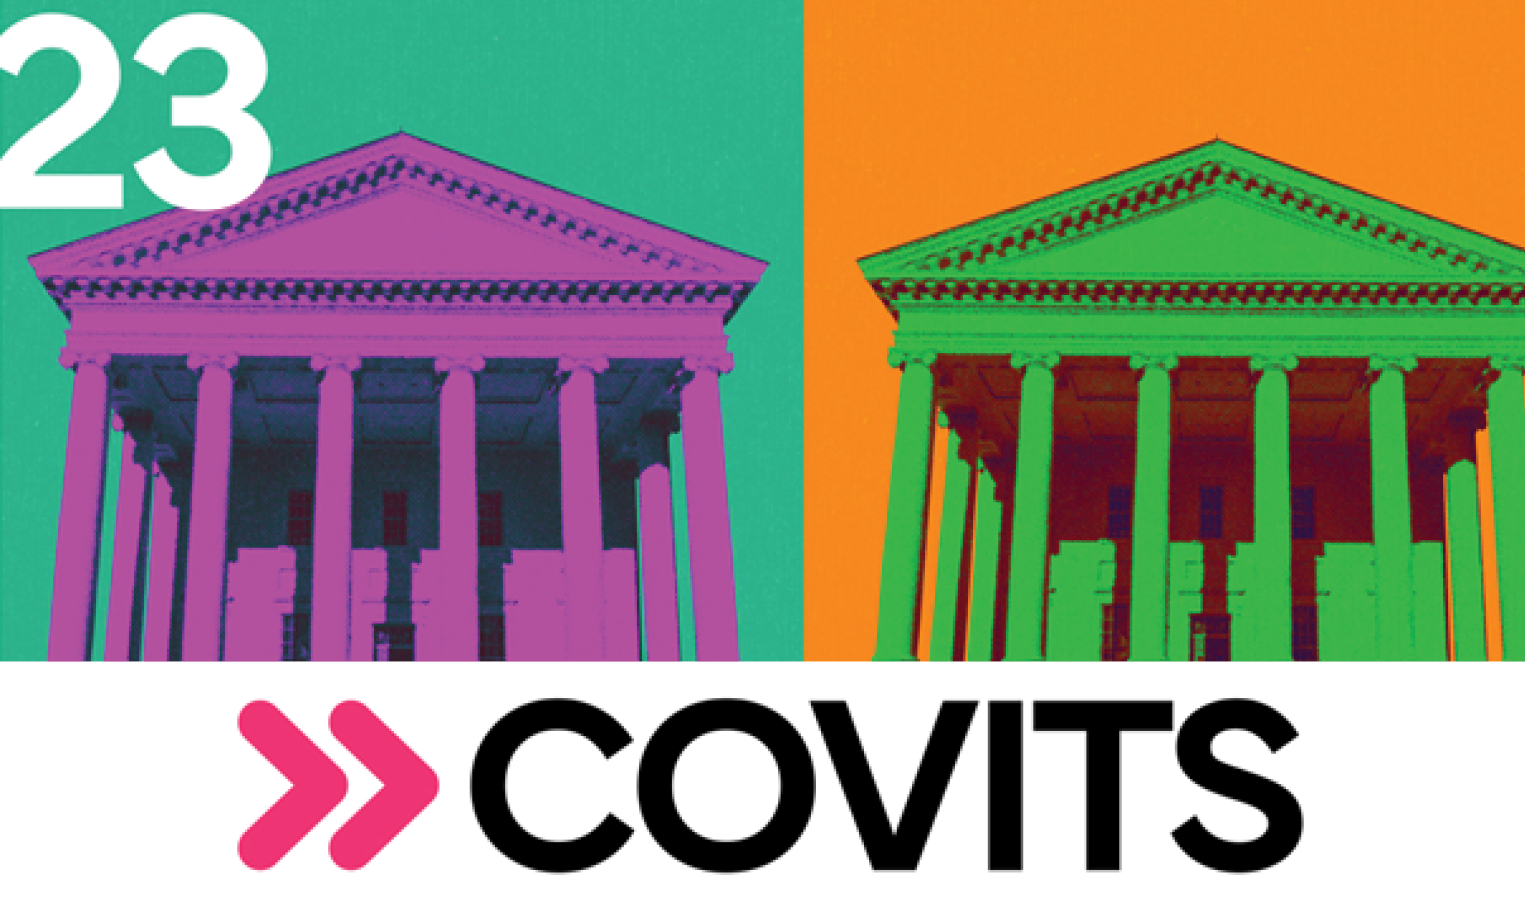 Conference imagery for COV IT symposium (COVITS), multicolored, Andy Warhol style images of the Virginia Capitol